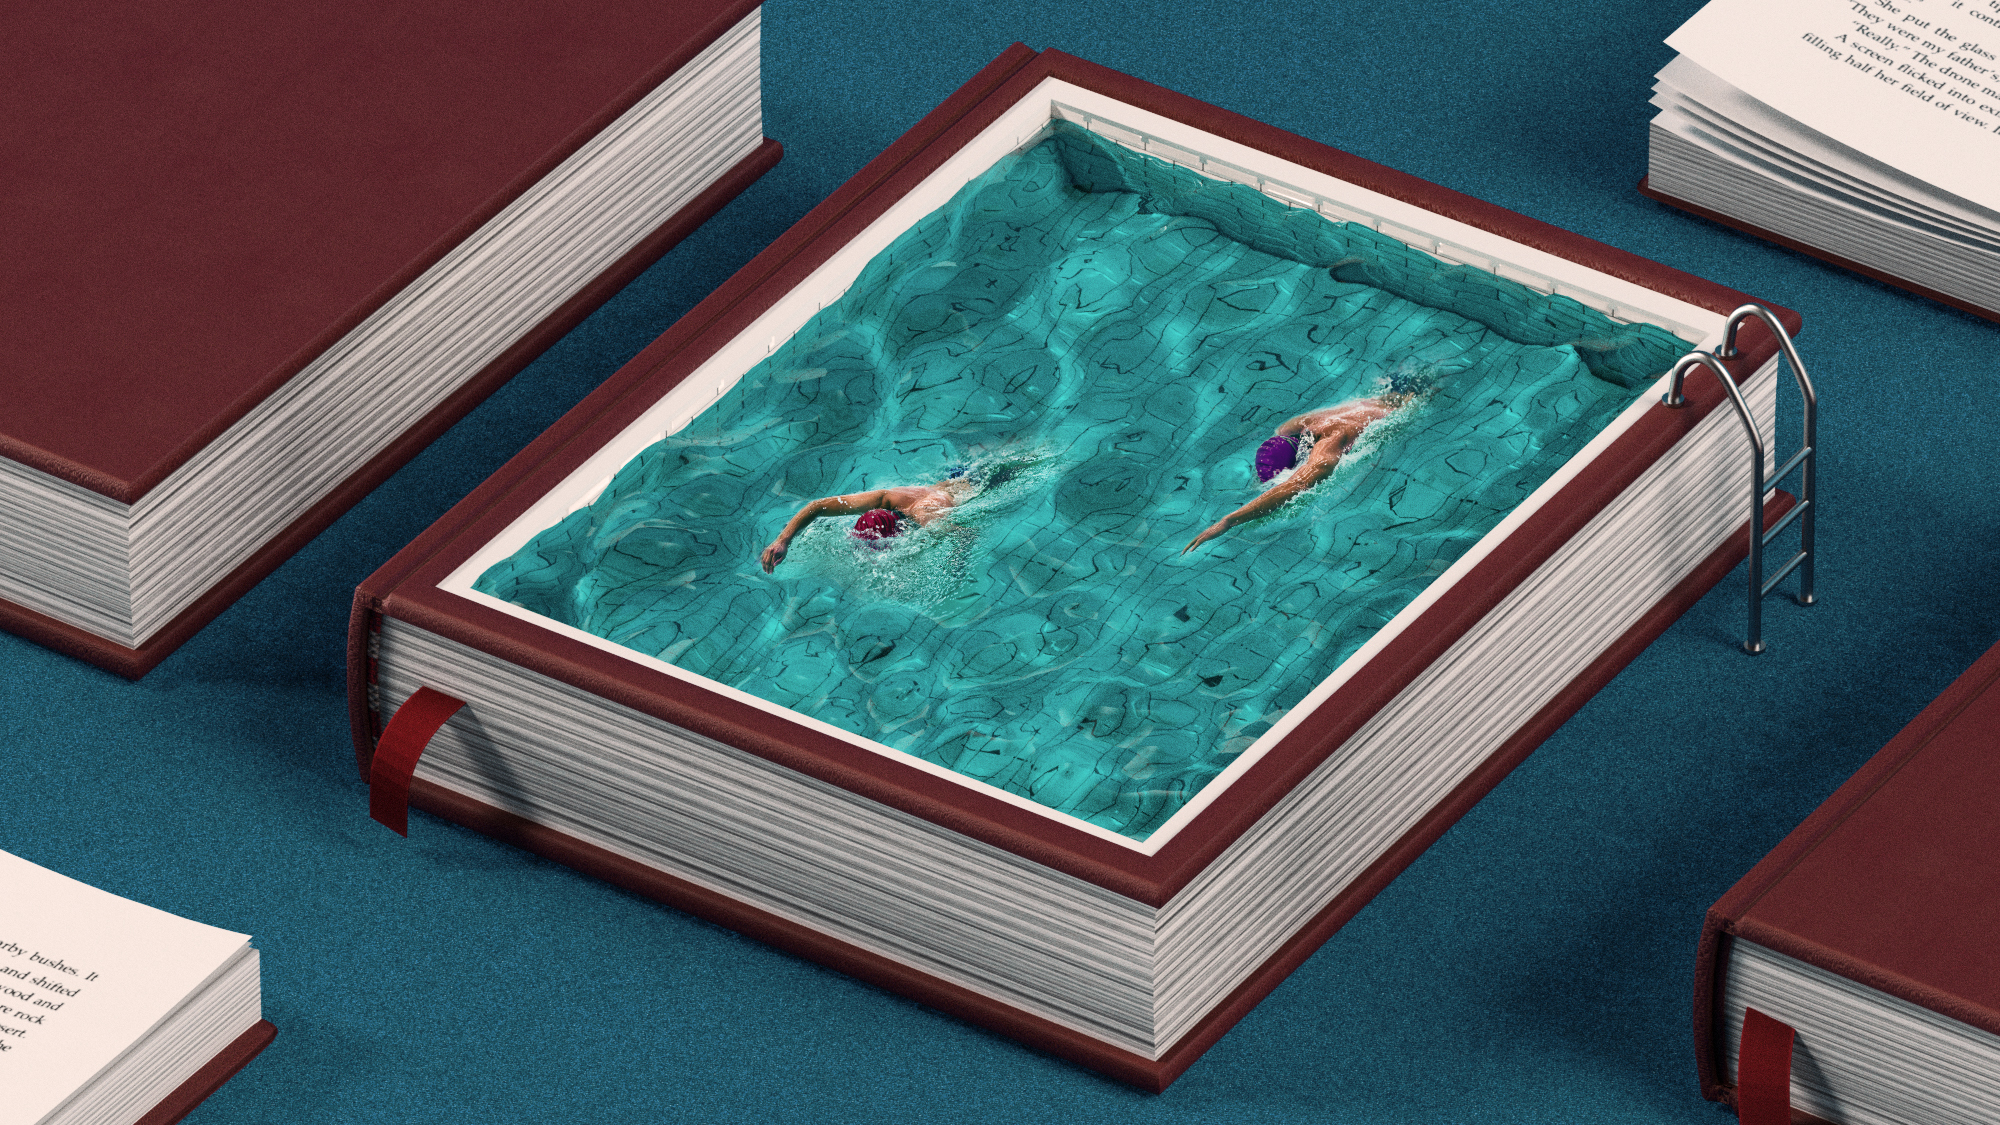 A swimming pool that looks like a book with two swimmers in it